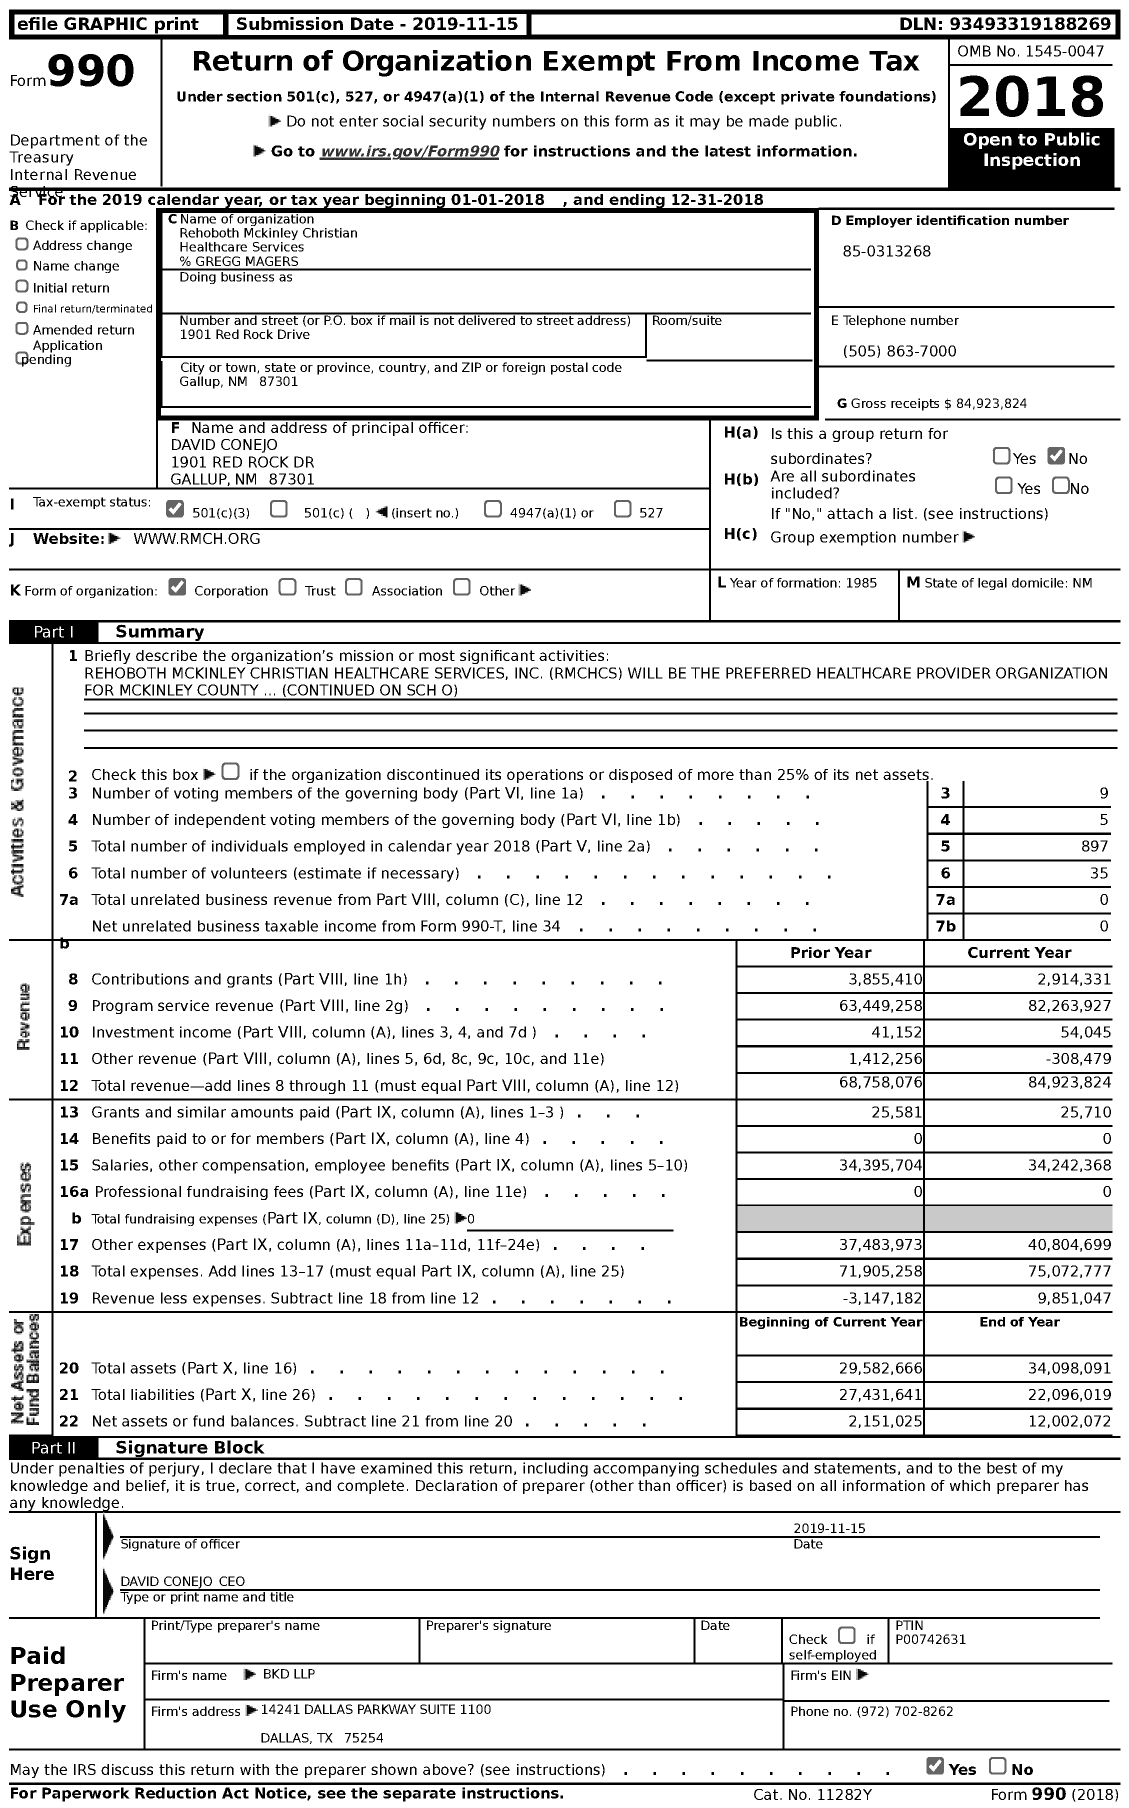 Image of first page of 2018 Form 990 for Rehoboth Mckinley Christian Health Care Services (RMCHCS)